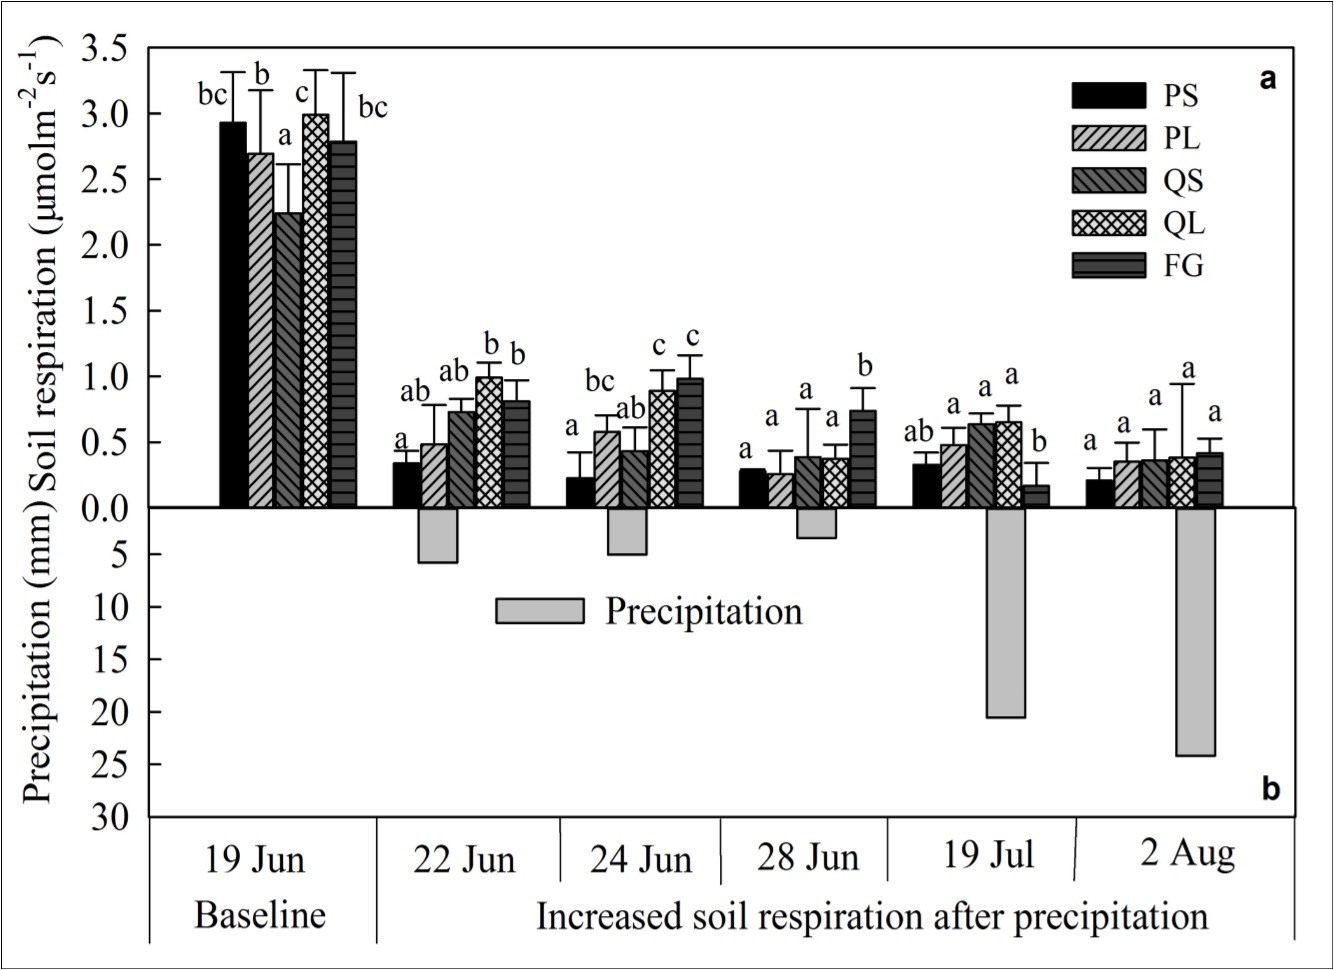  Soil respiration of baseline and corresponding increased values following precipitations for different size classes and canopy conditions (mean ± SE, n=4). Different lowercase letters indicate significant differences (P < 0.05) among different canopy cover conditions (PS, PL, QS, QL, and FG) for the same precipitation event. PS, PL, QS, QL, and FG represent P. armandii with small size class and large size class, Q. aliena with small size class and large size class, and forest gap, respectively.